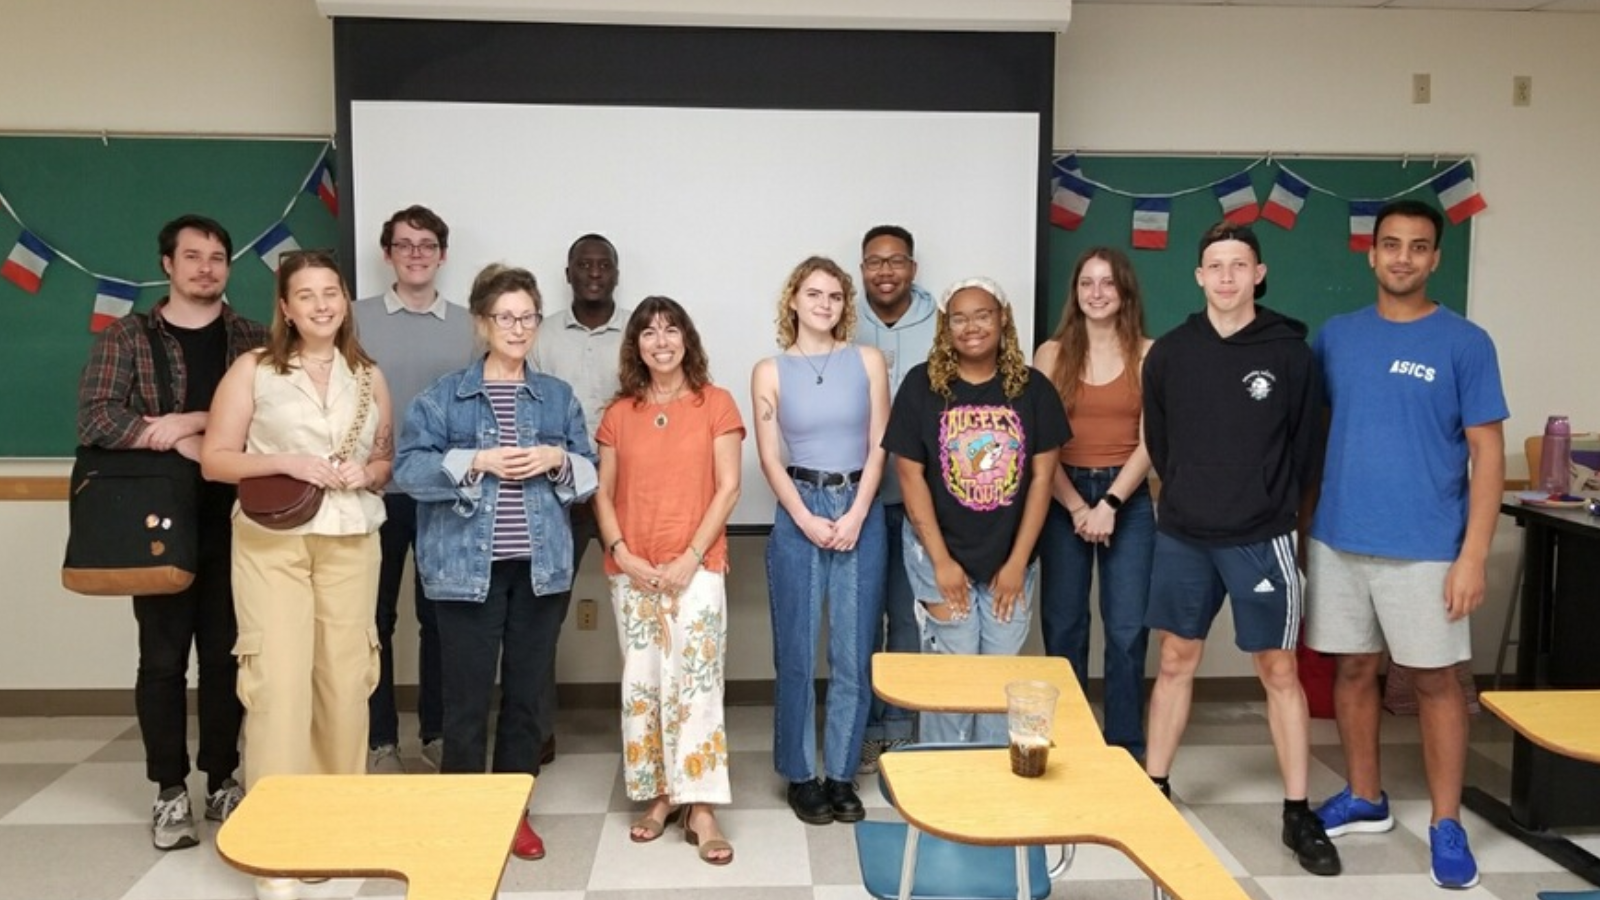 group of people standing in front of a classroom